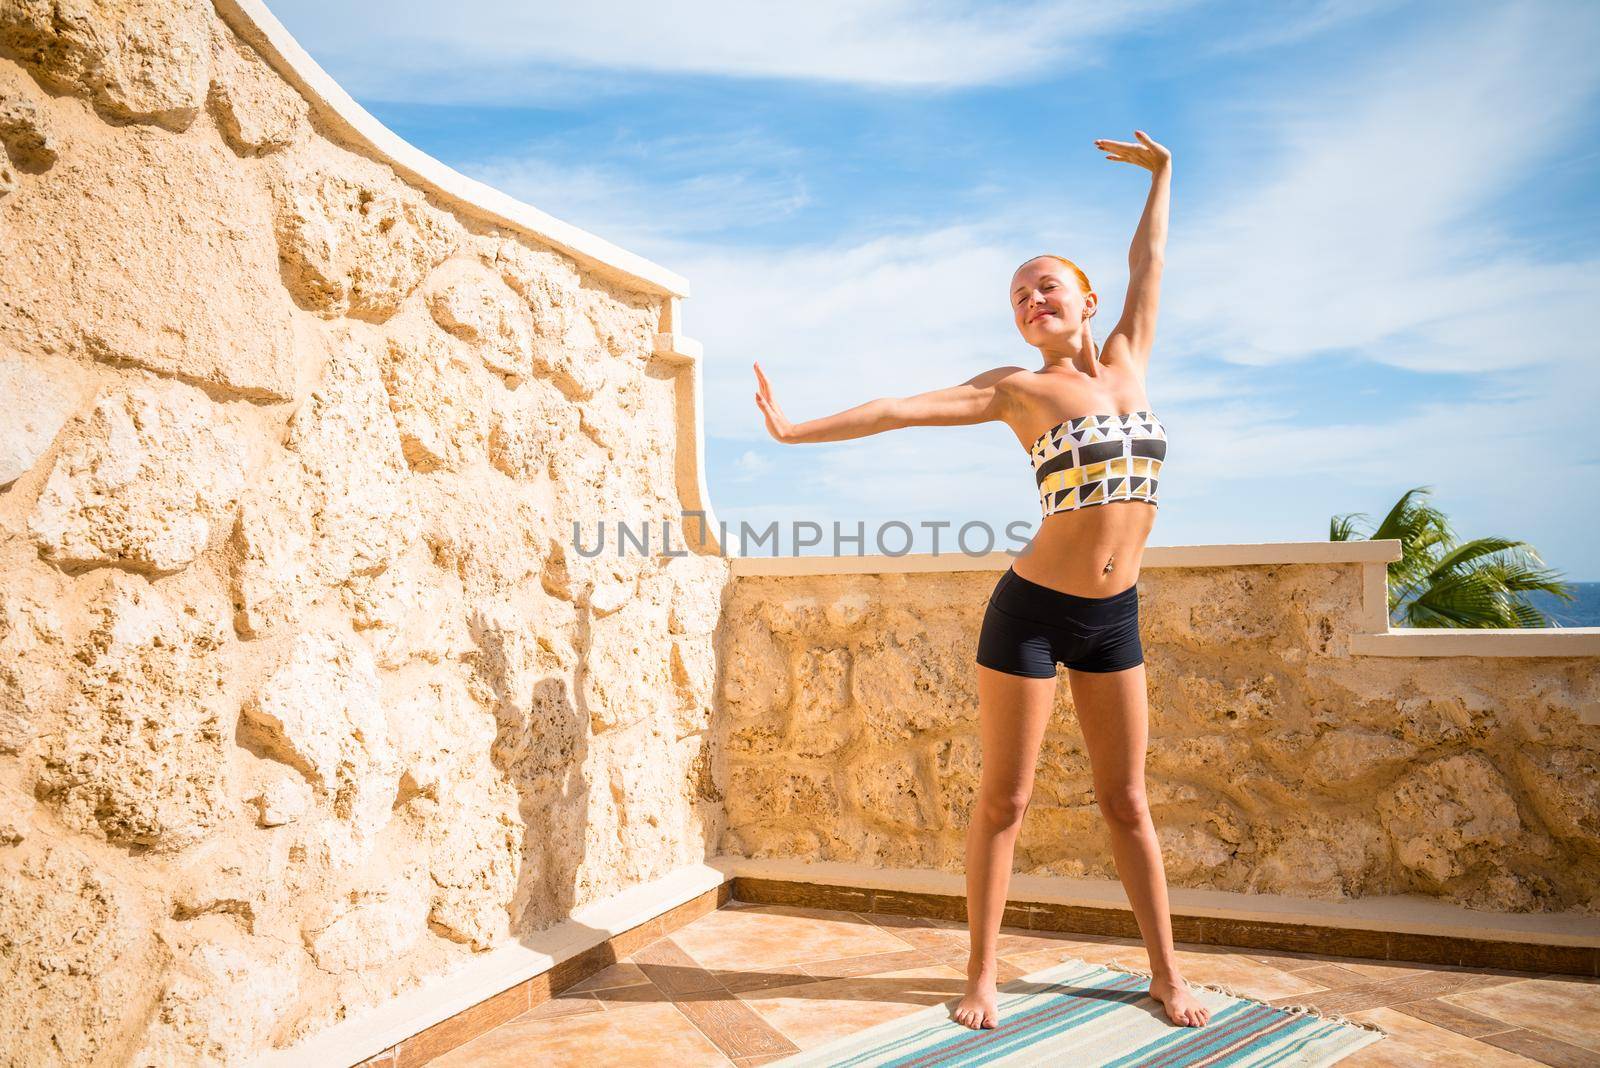 Beautiful woman practicing yoga outdoors against blue sky